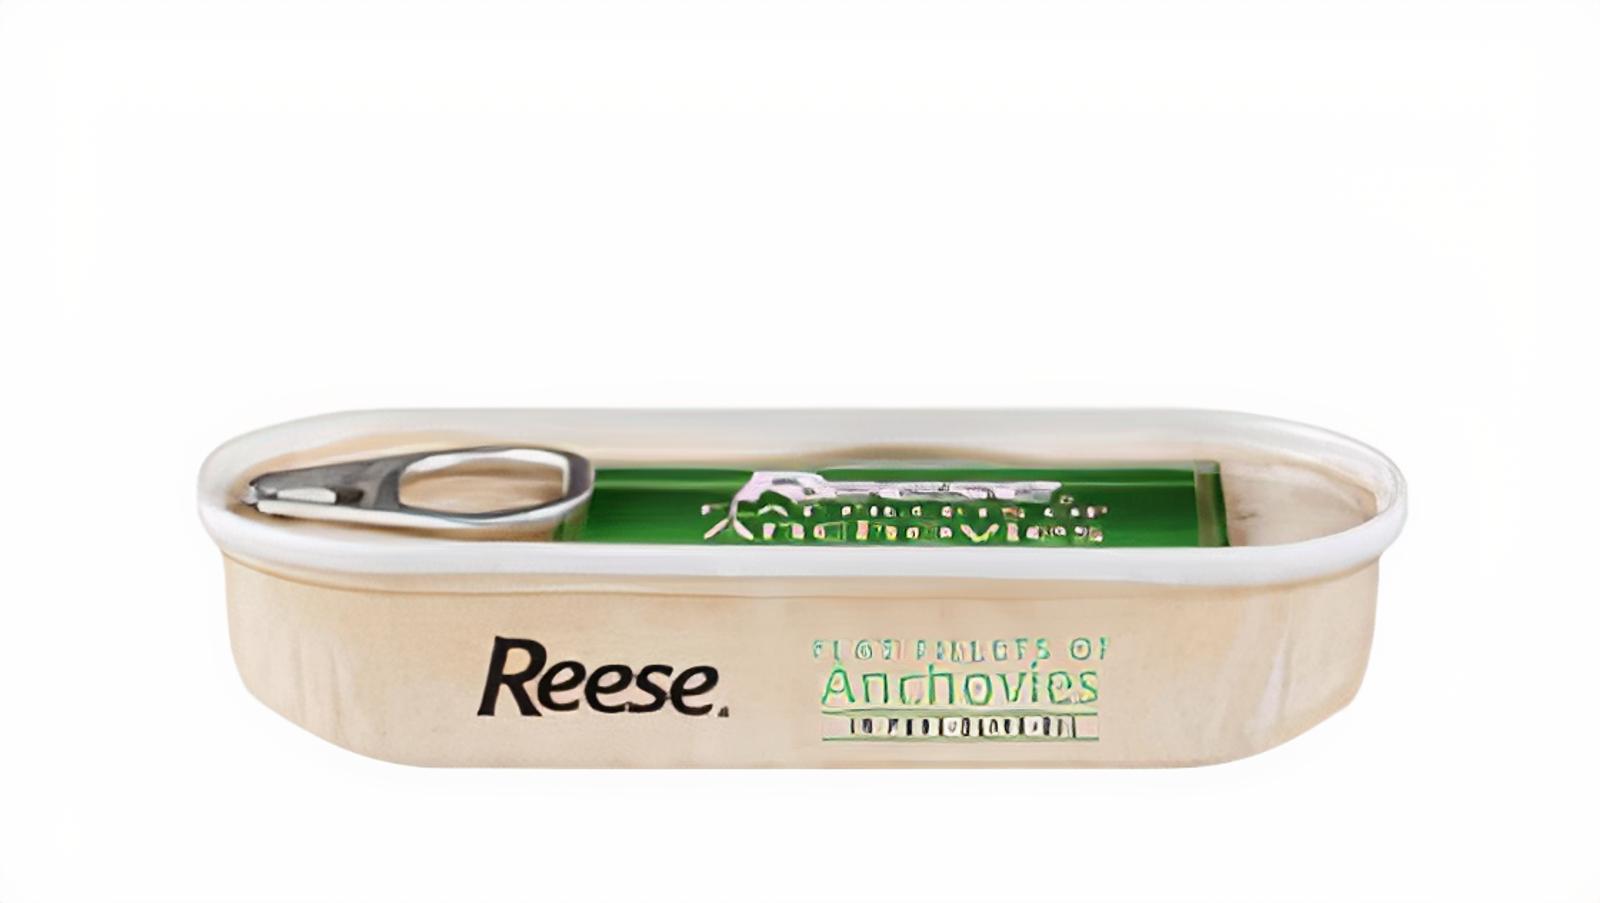 Reese Anchovies (2 oz.)